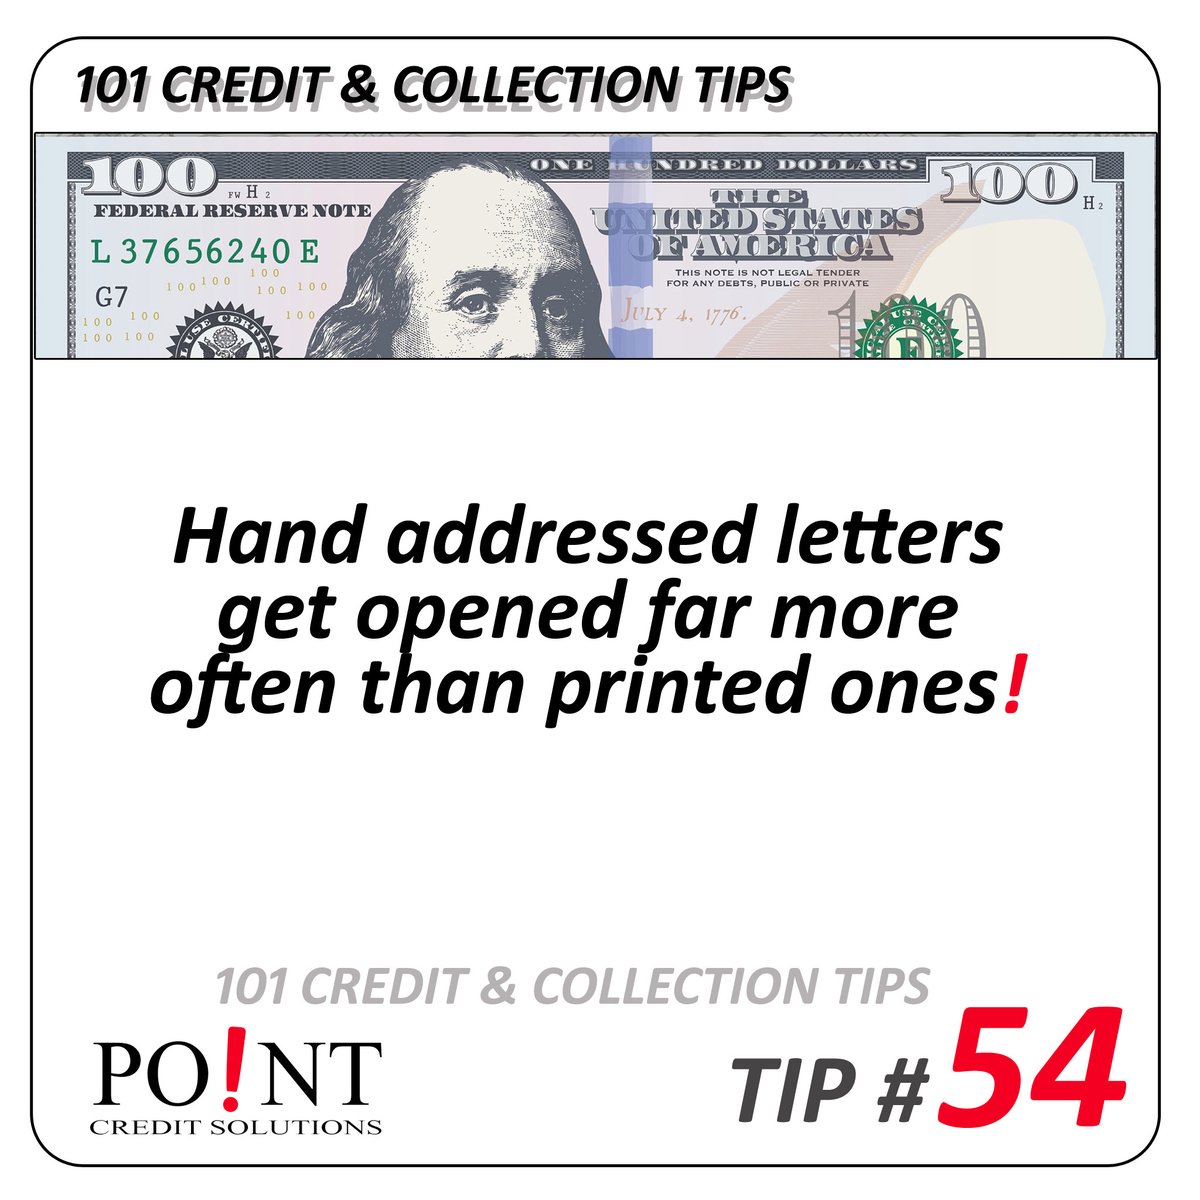 Find more tips here -> zcu.io/PmSO
#PointCredit #CollectionTips #Debt #DebtCollection #Handwritten